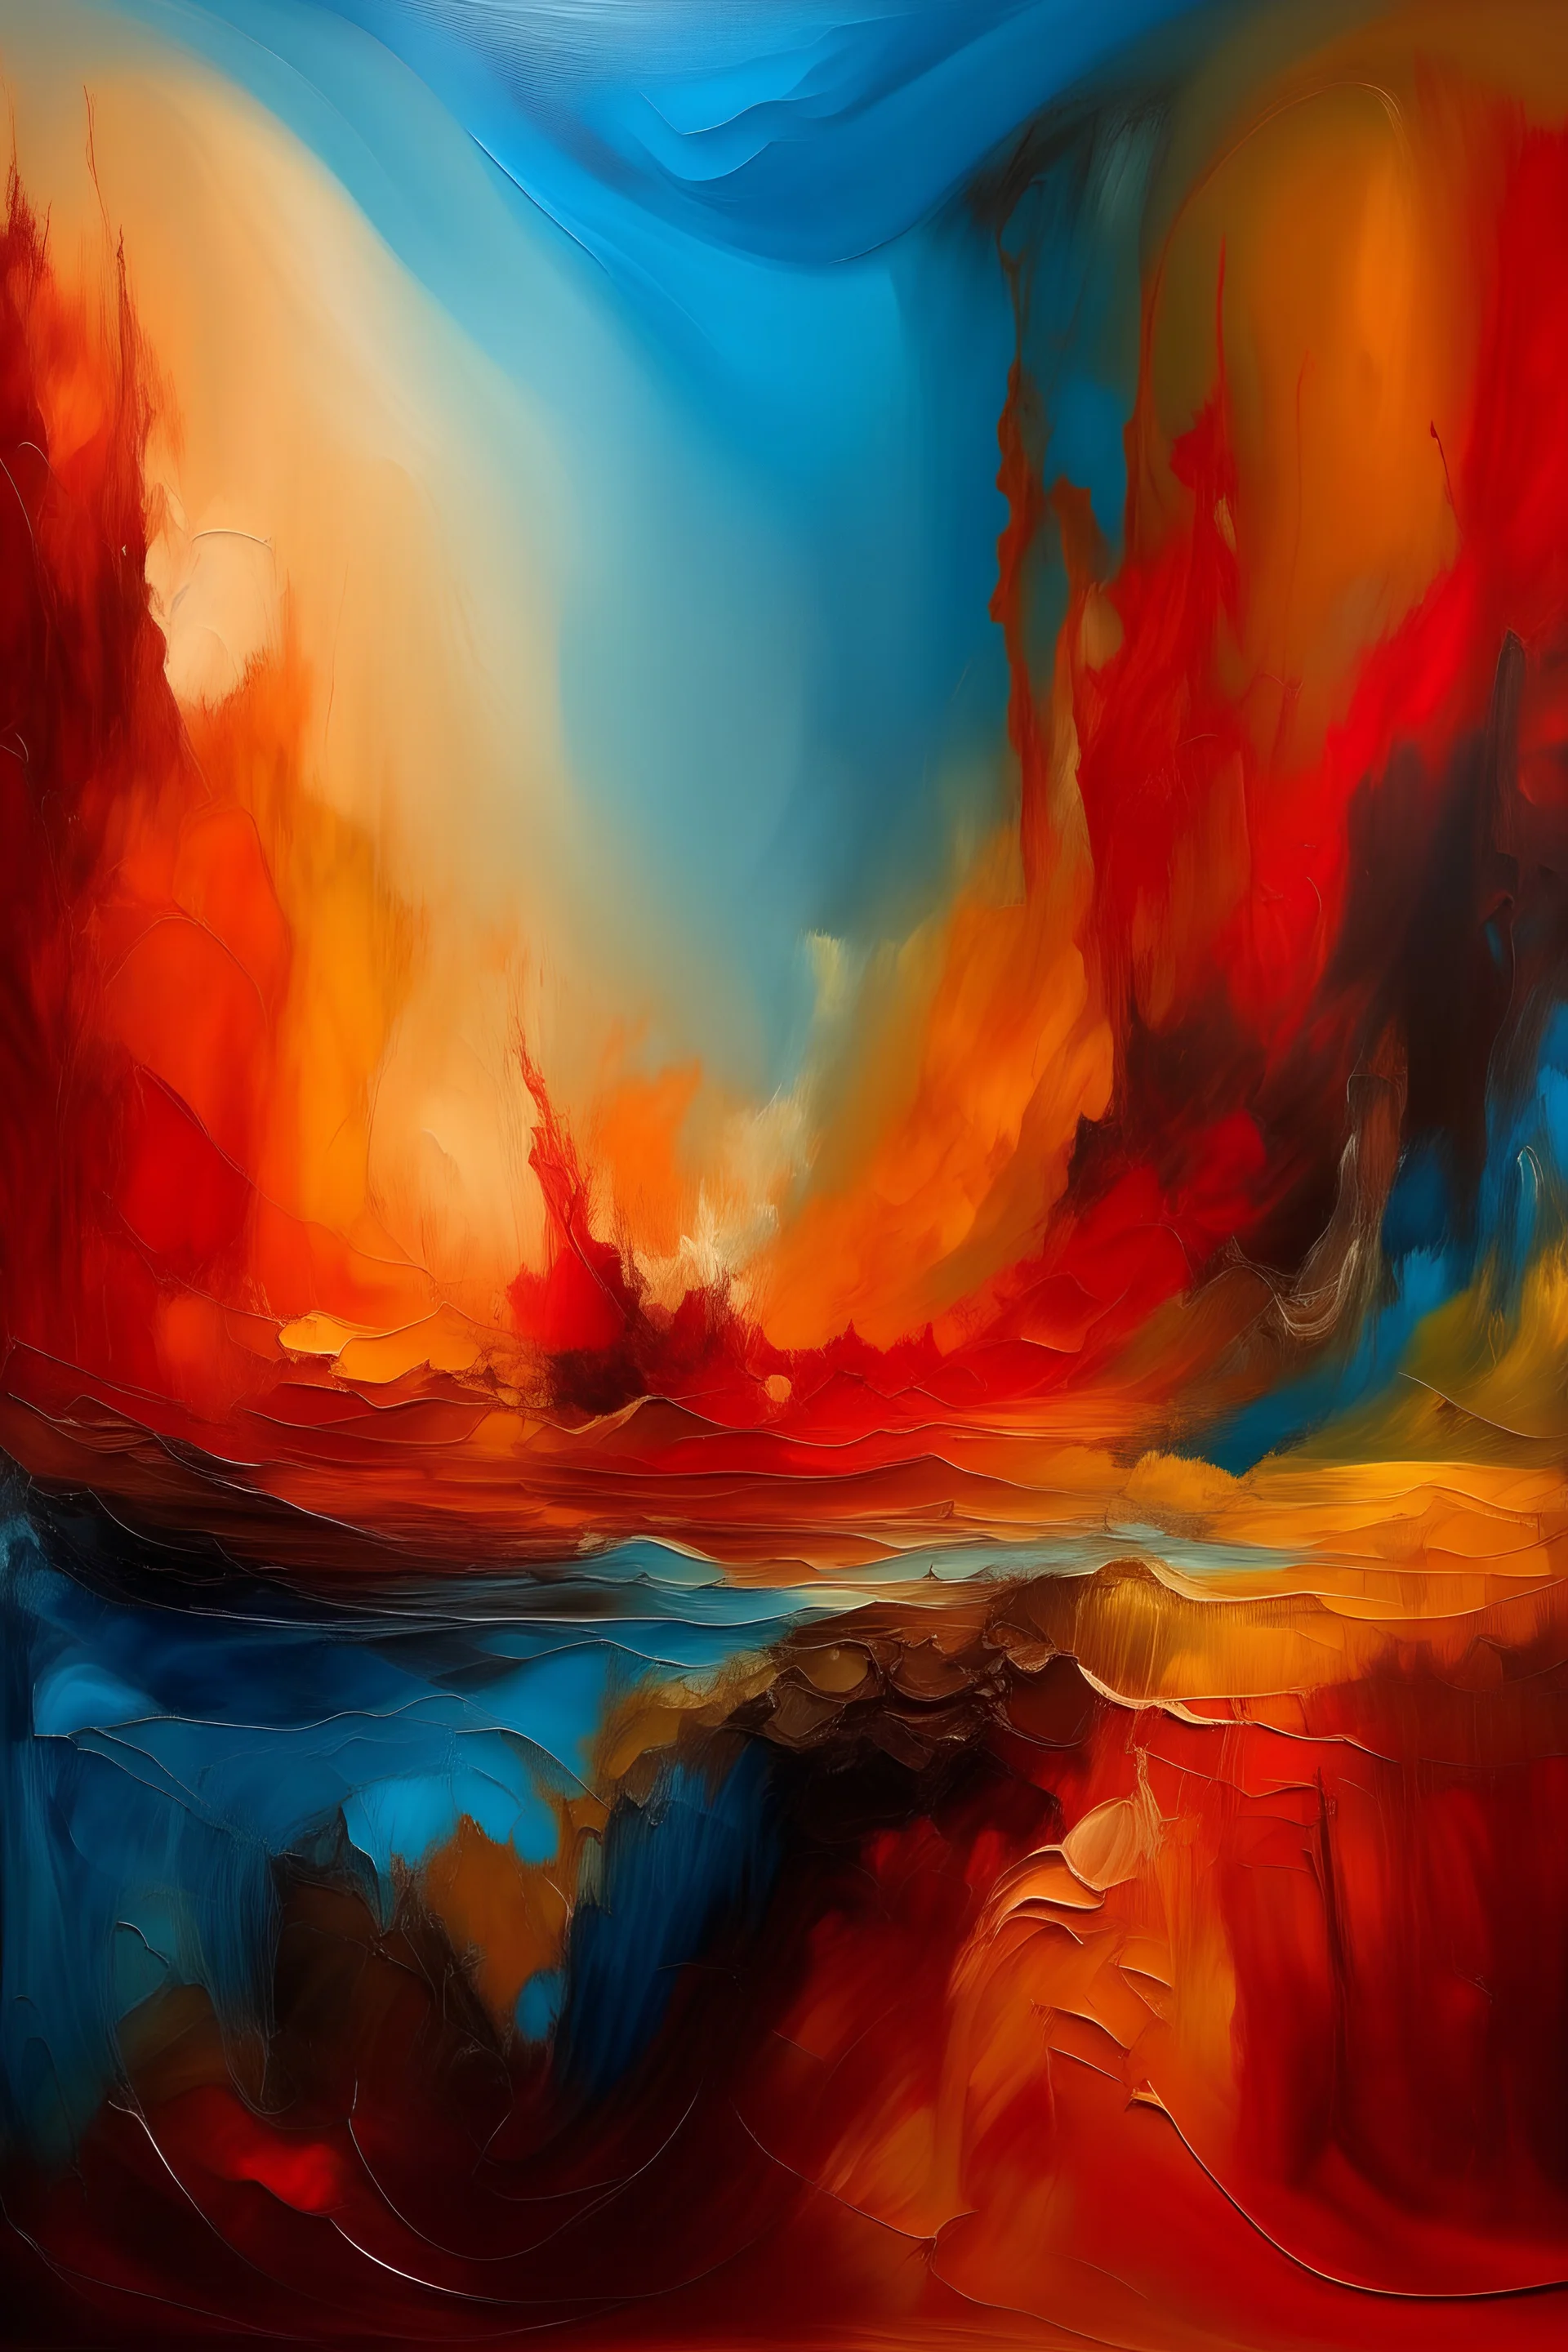 An abstract painting conveying the difference between heat and temperature